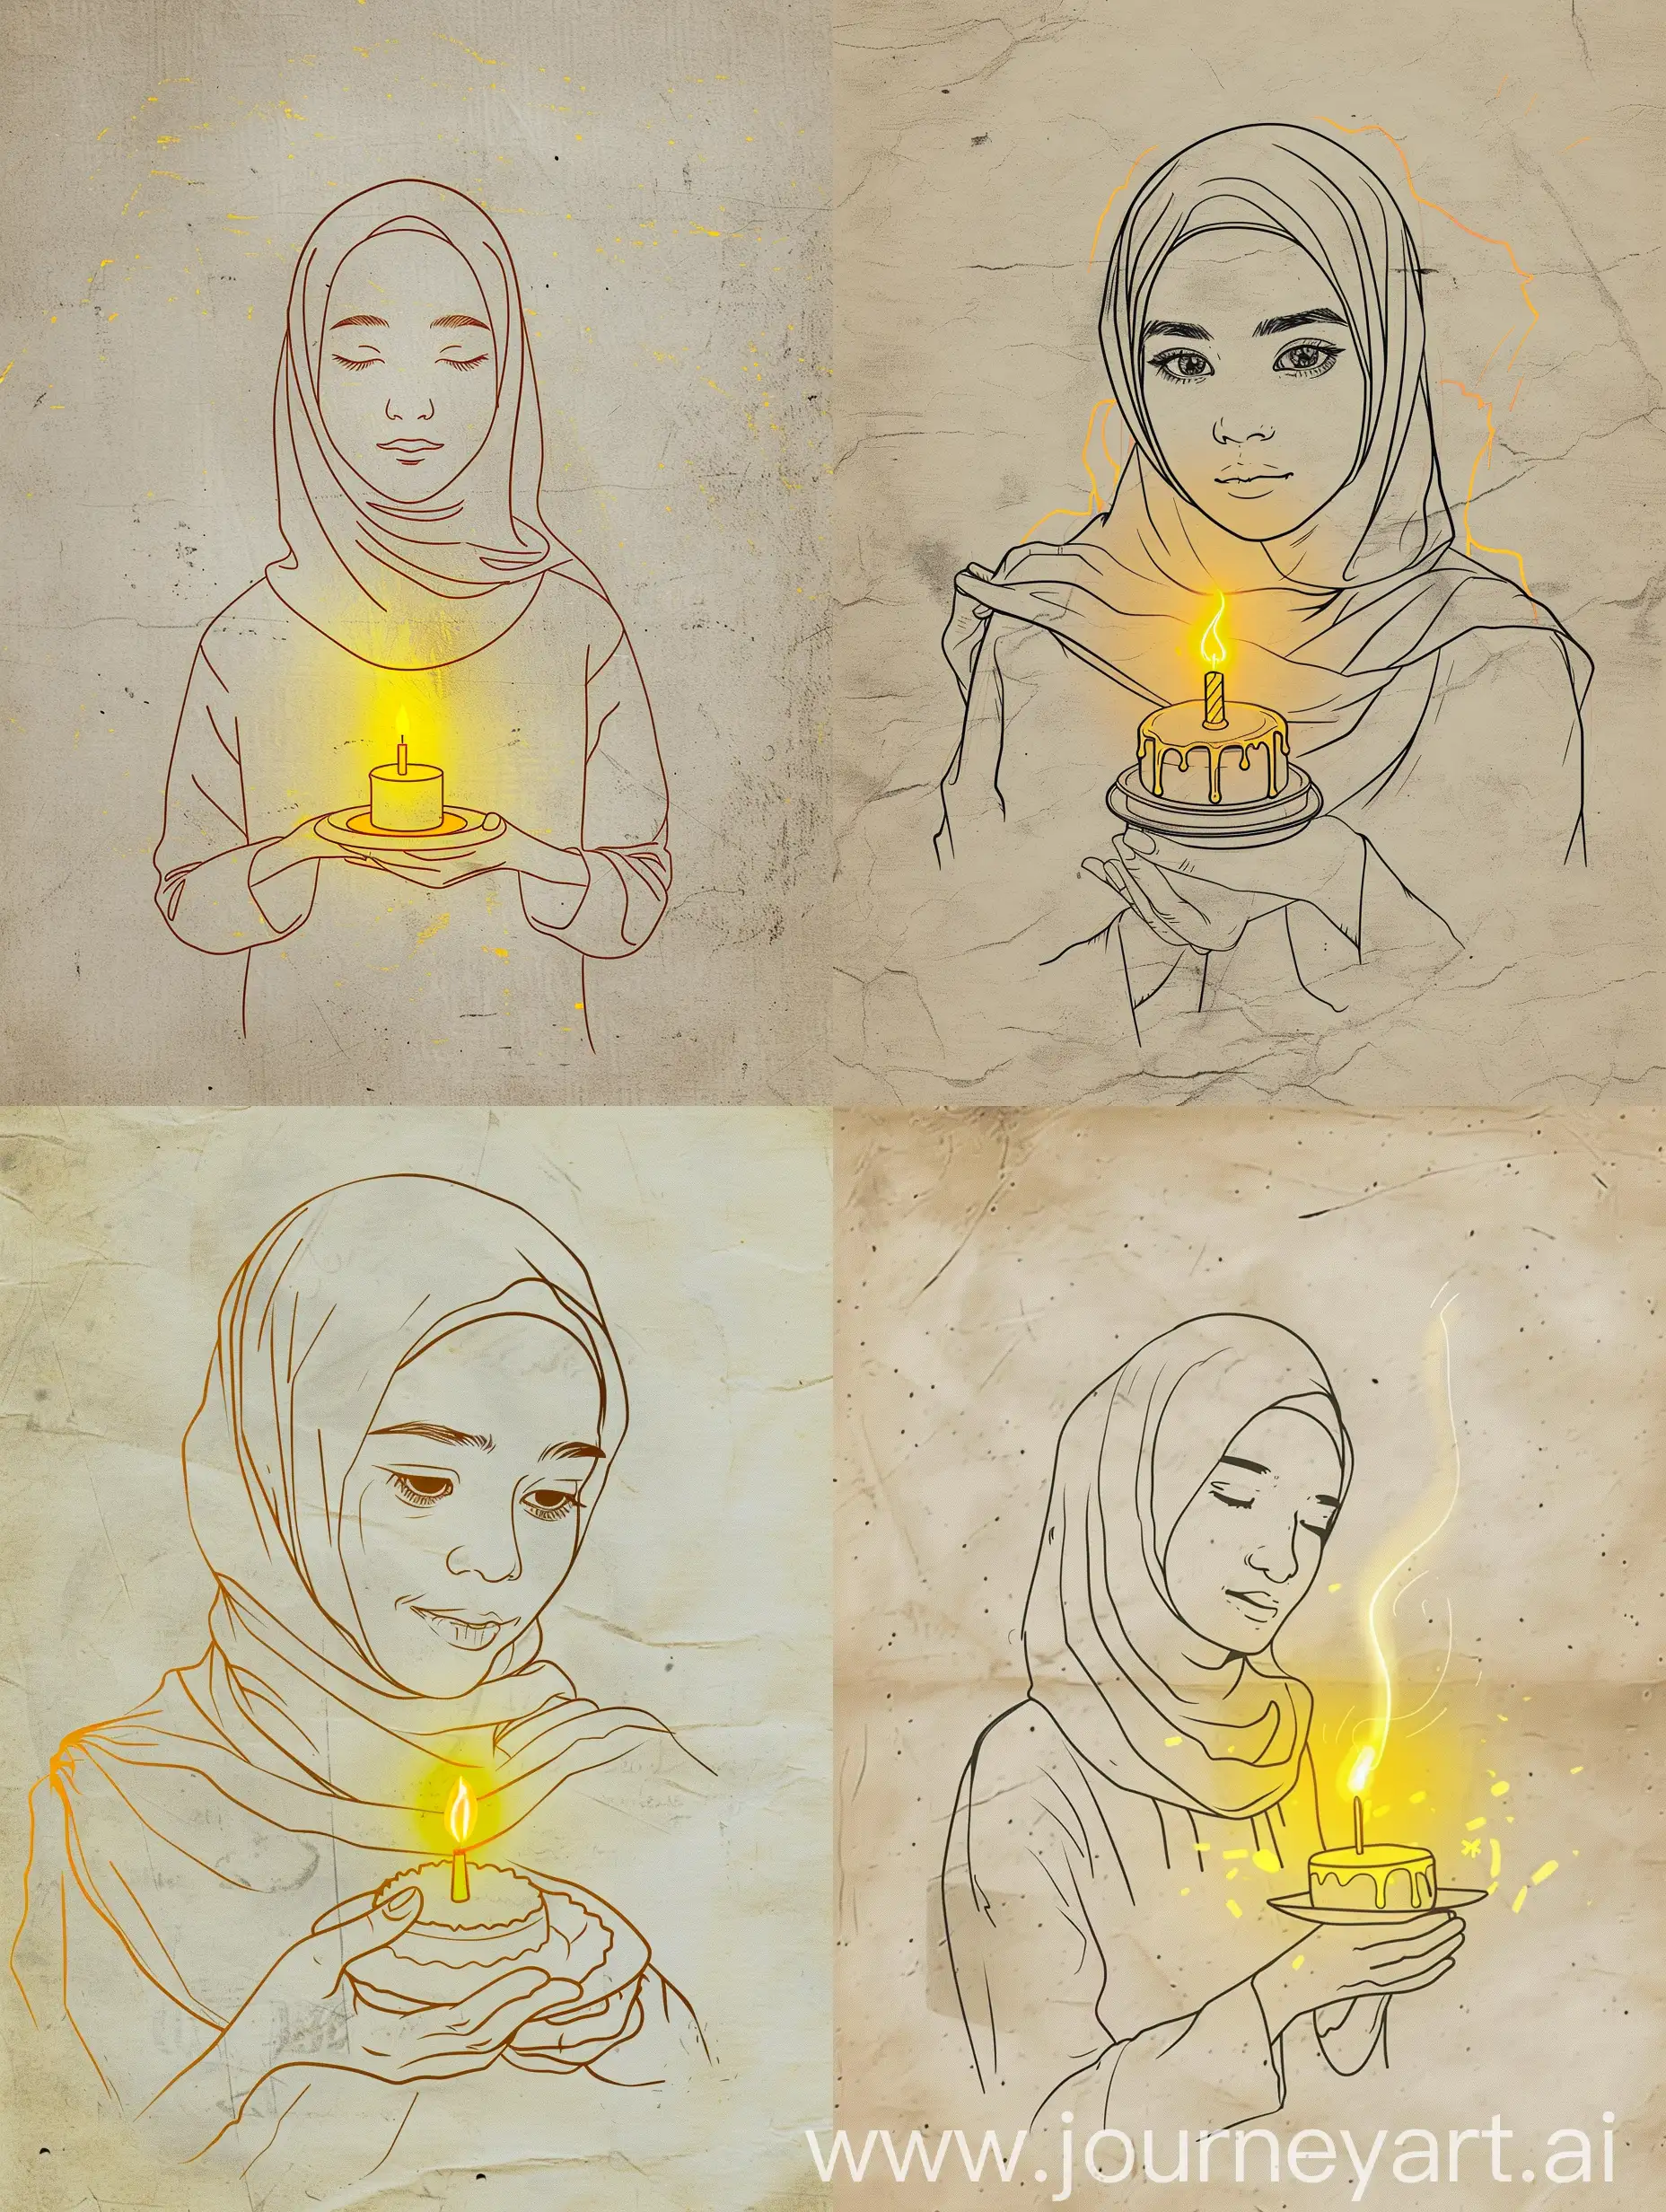 a very simple and minimalist outline sketch/line drawing portrait on old paper depicts a young beautiful girl hijab holding a small cake with one lit candle on it. The yellow light from the candle illuminates her face in the drawing, creating the illusion of three-dimensional depth on the minimalist outline illustration. 